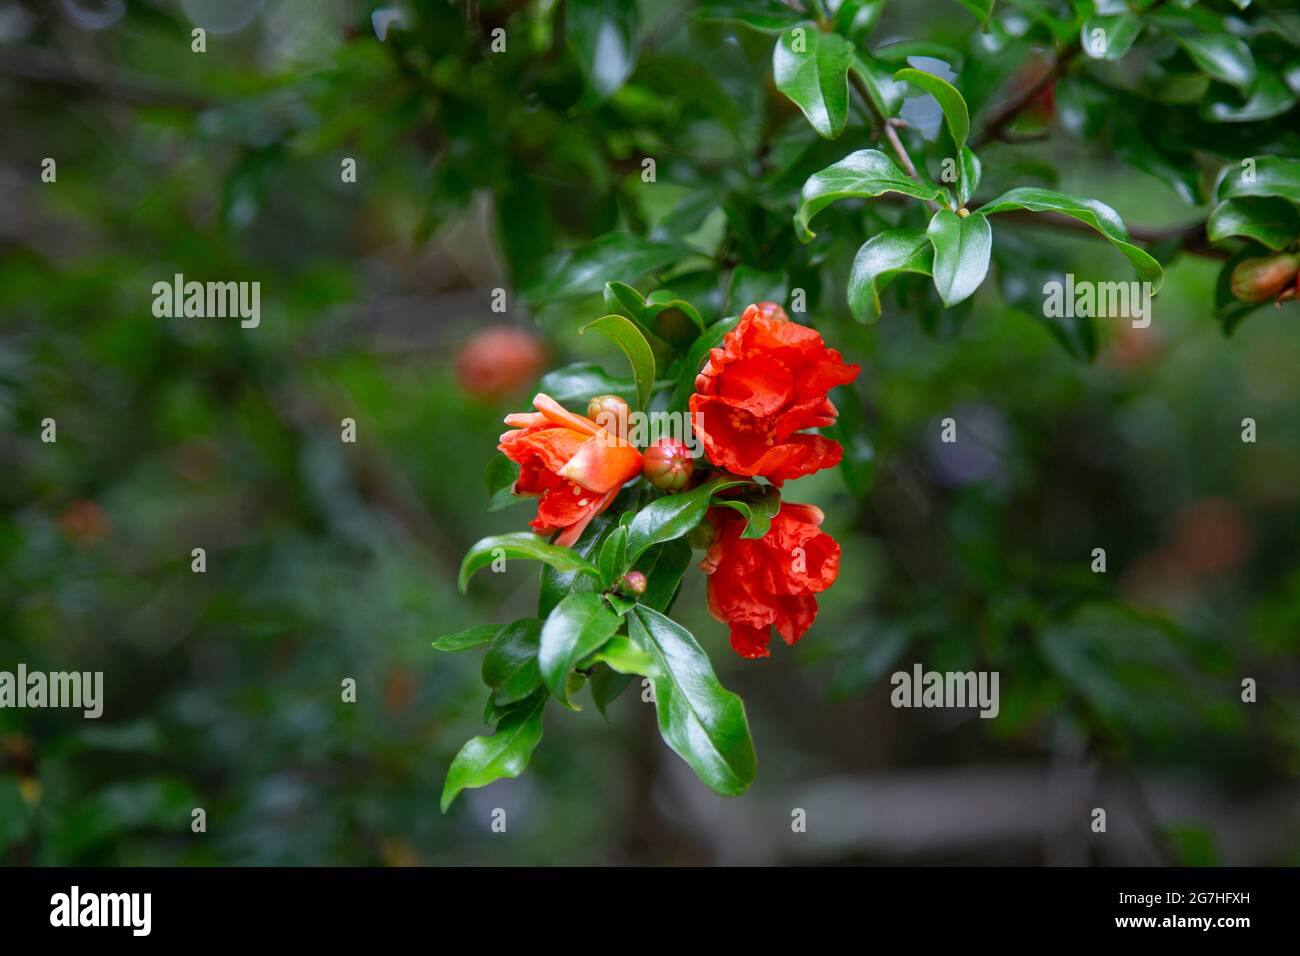 Pomegranate flowers precede the bright red fruit used in many cuisines around the world. The tree (Punica granatum) is native to Persia (Iran).   The Stock Photo